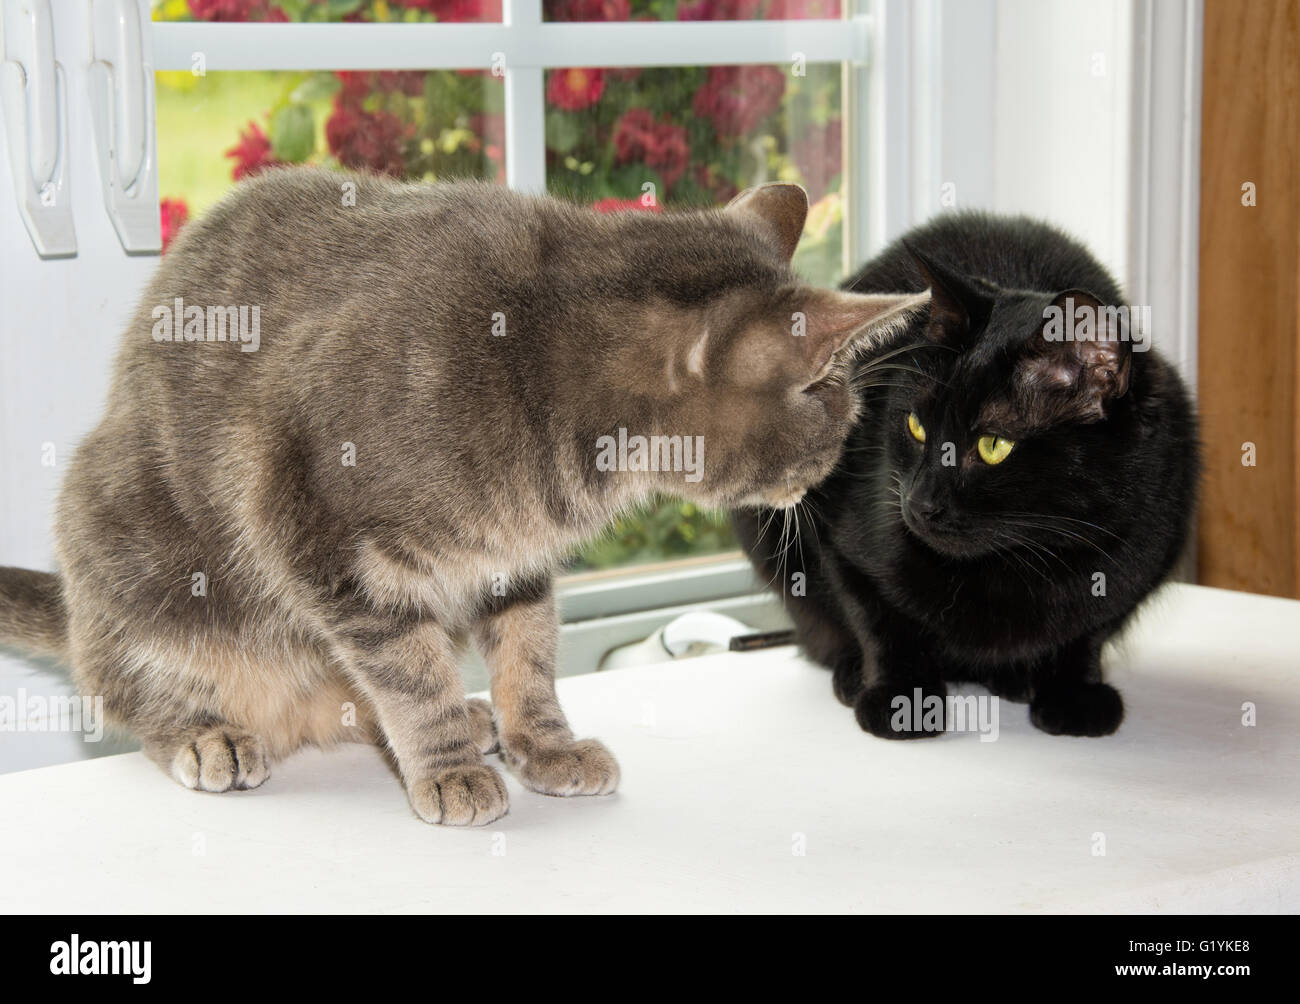 Two cats looking at each other suspiciously, in front of a window Stock Photo